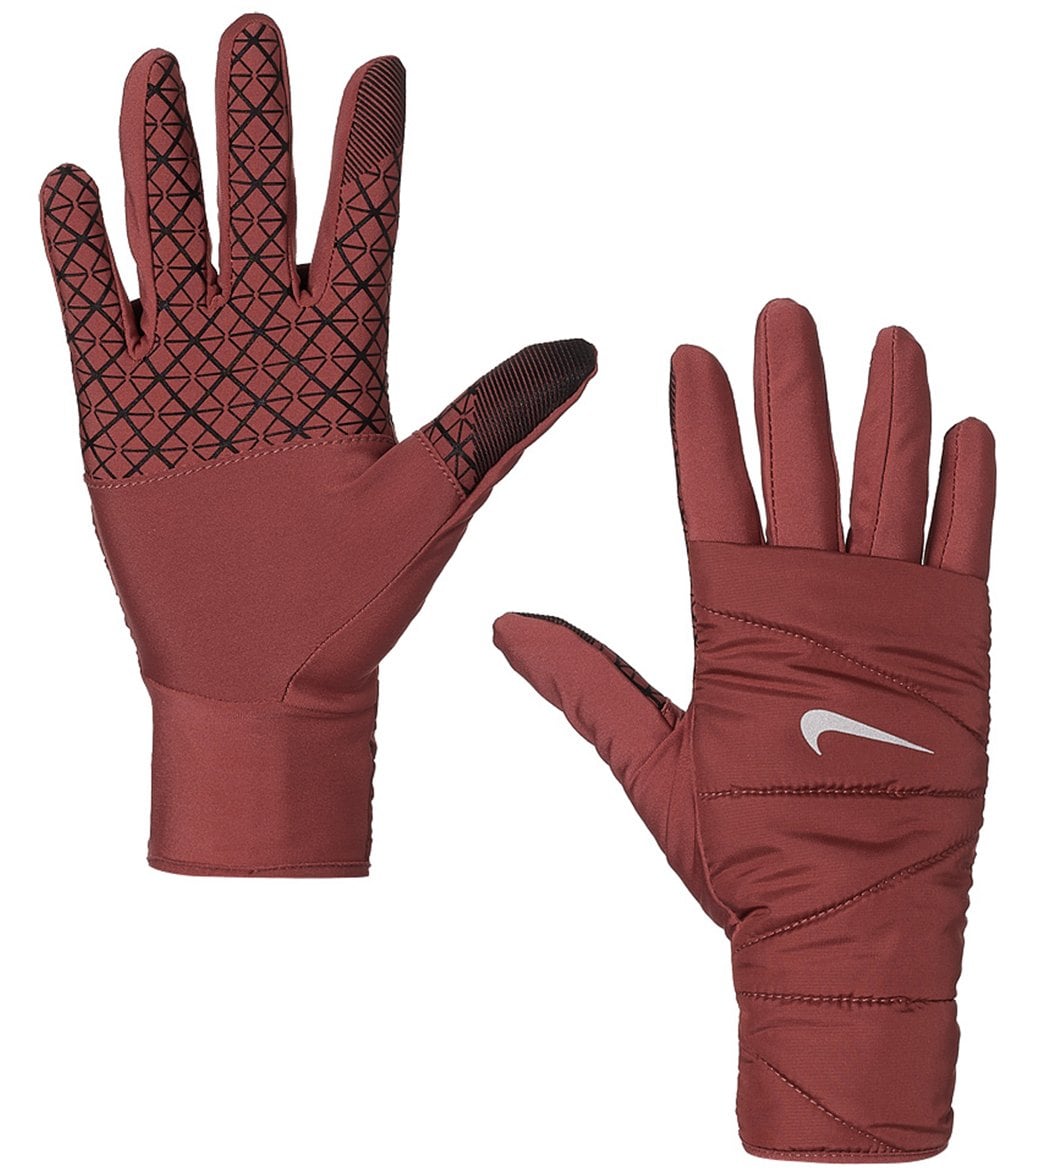 Nike Women's Quilted Run Gloves 2.0 - Cedar/Silver Large - Swimoutlet.com